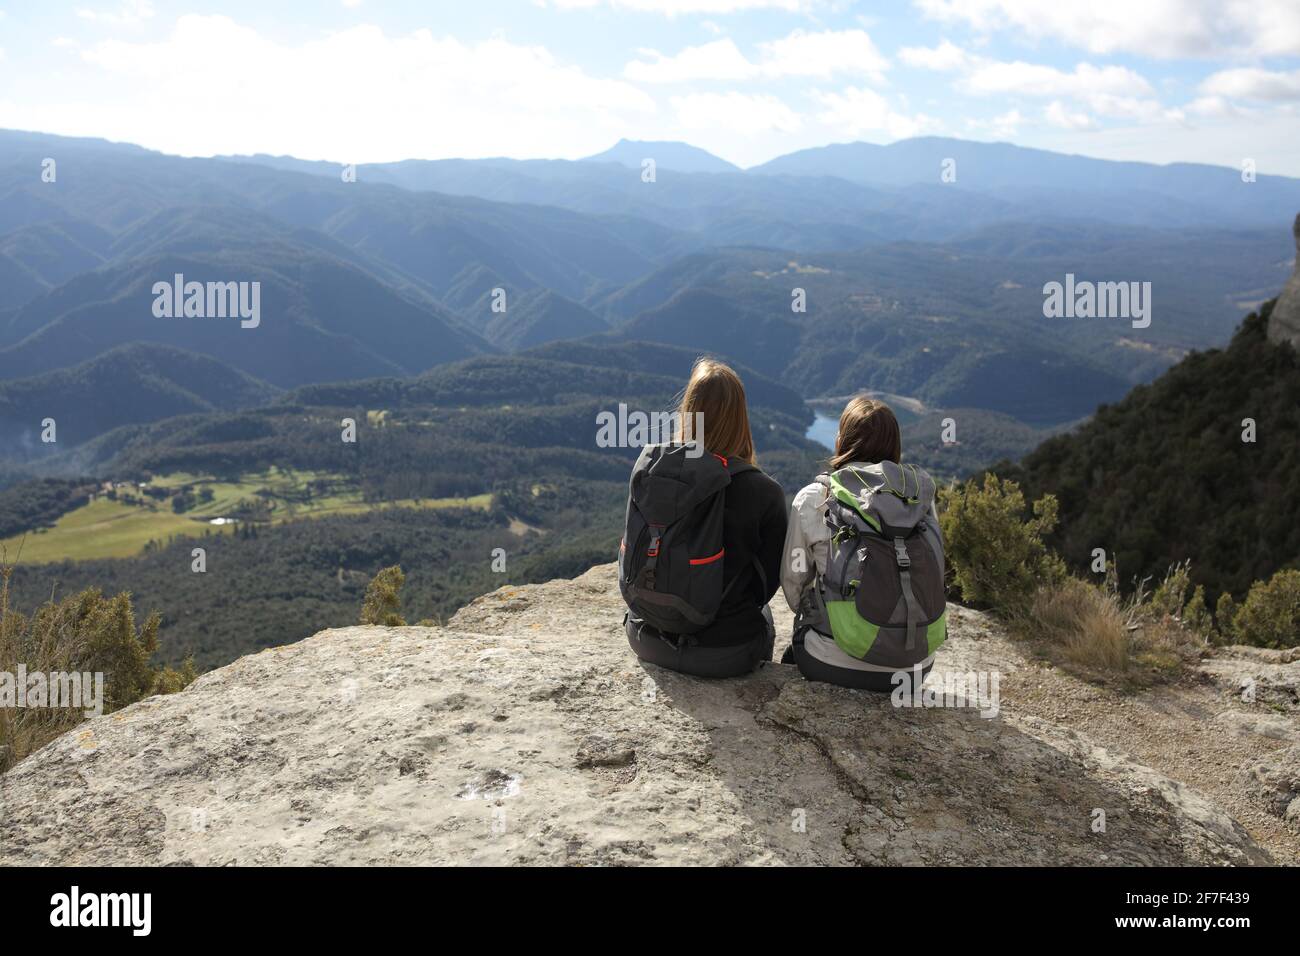 Back view portrait of two trekkers resting contemplating views on the top of a cliff in the mountain Stock Photo